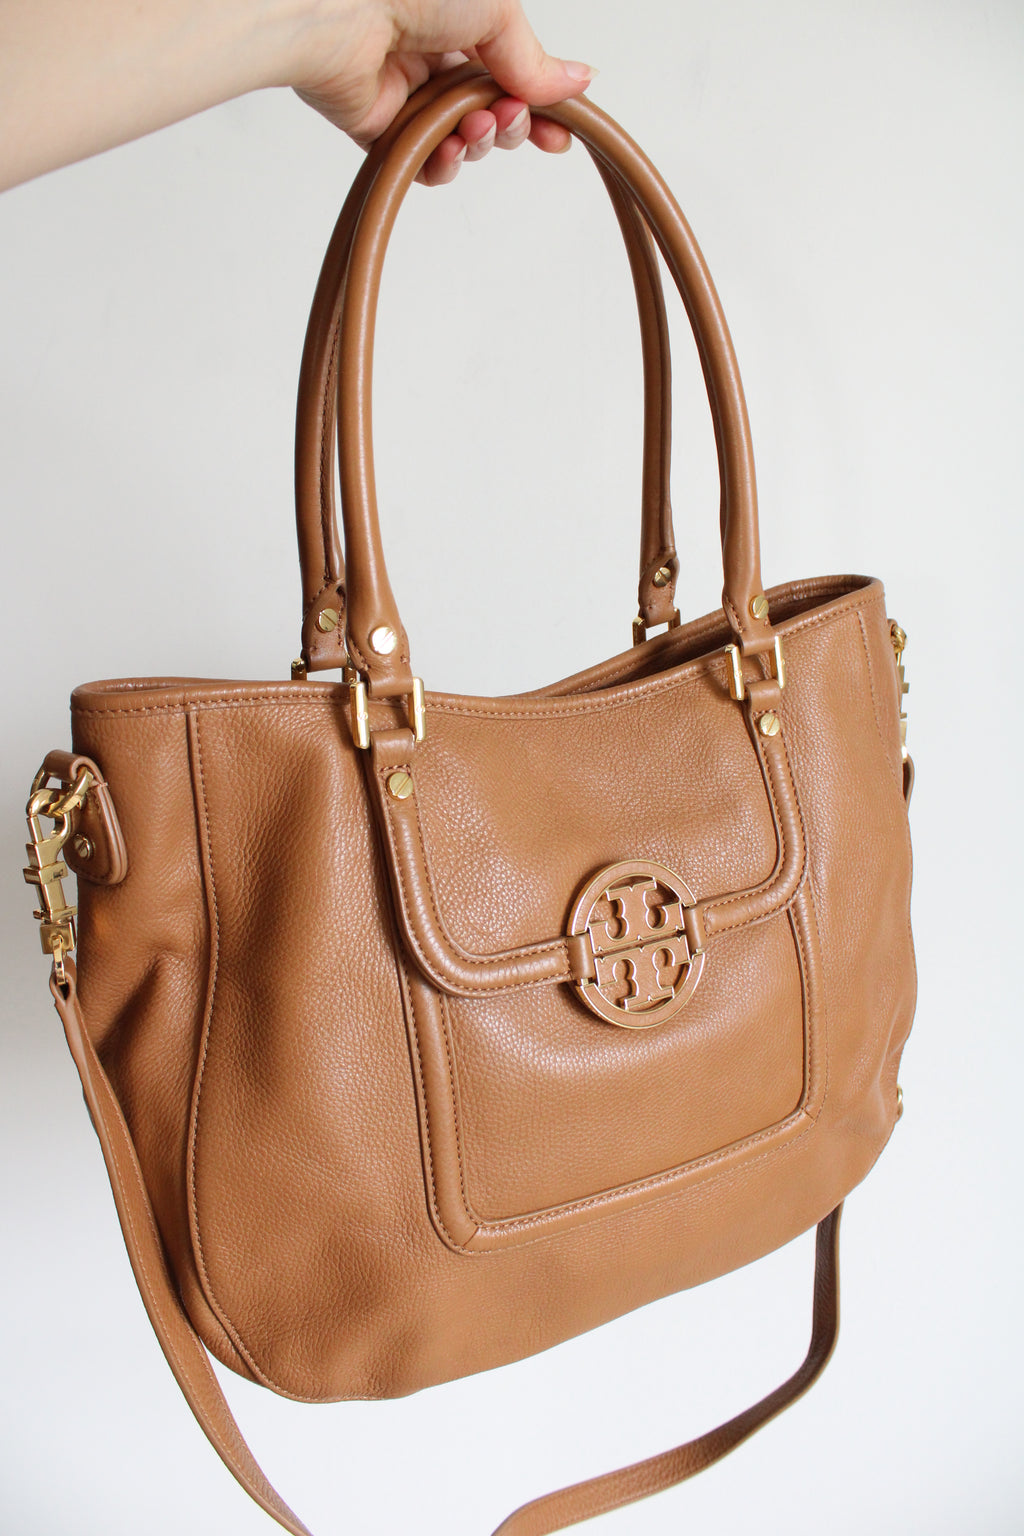 Tory Burch Convertible Golden Brown Pebble Leather Purse